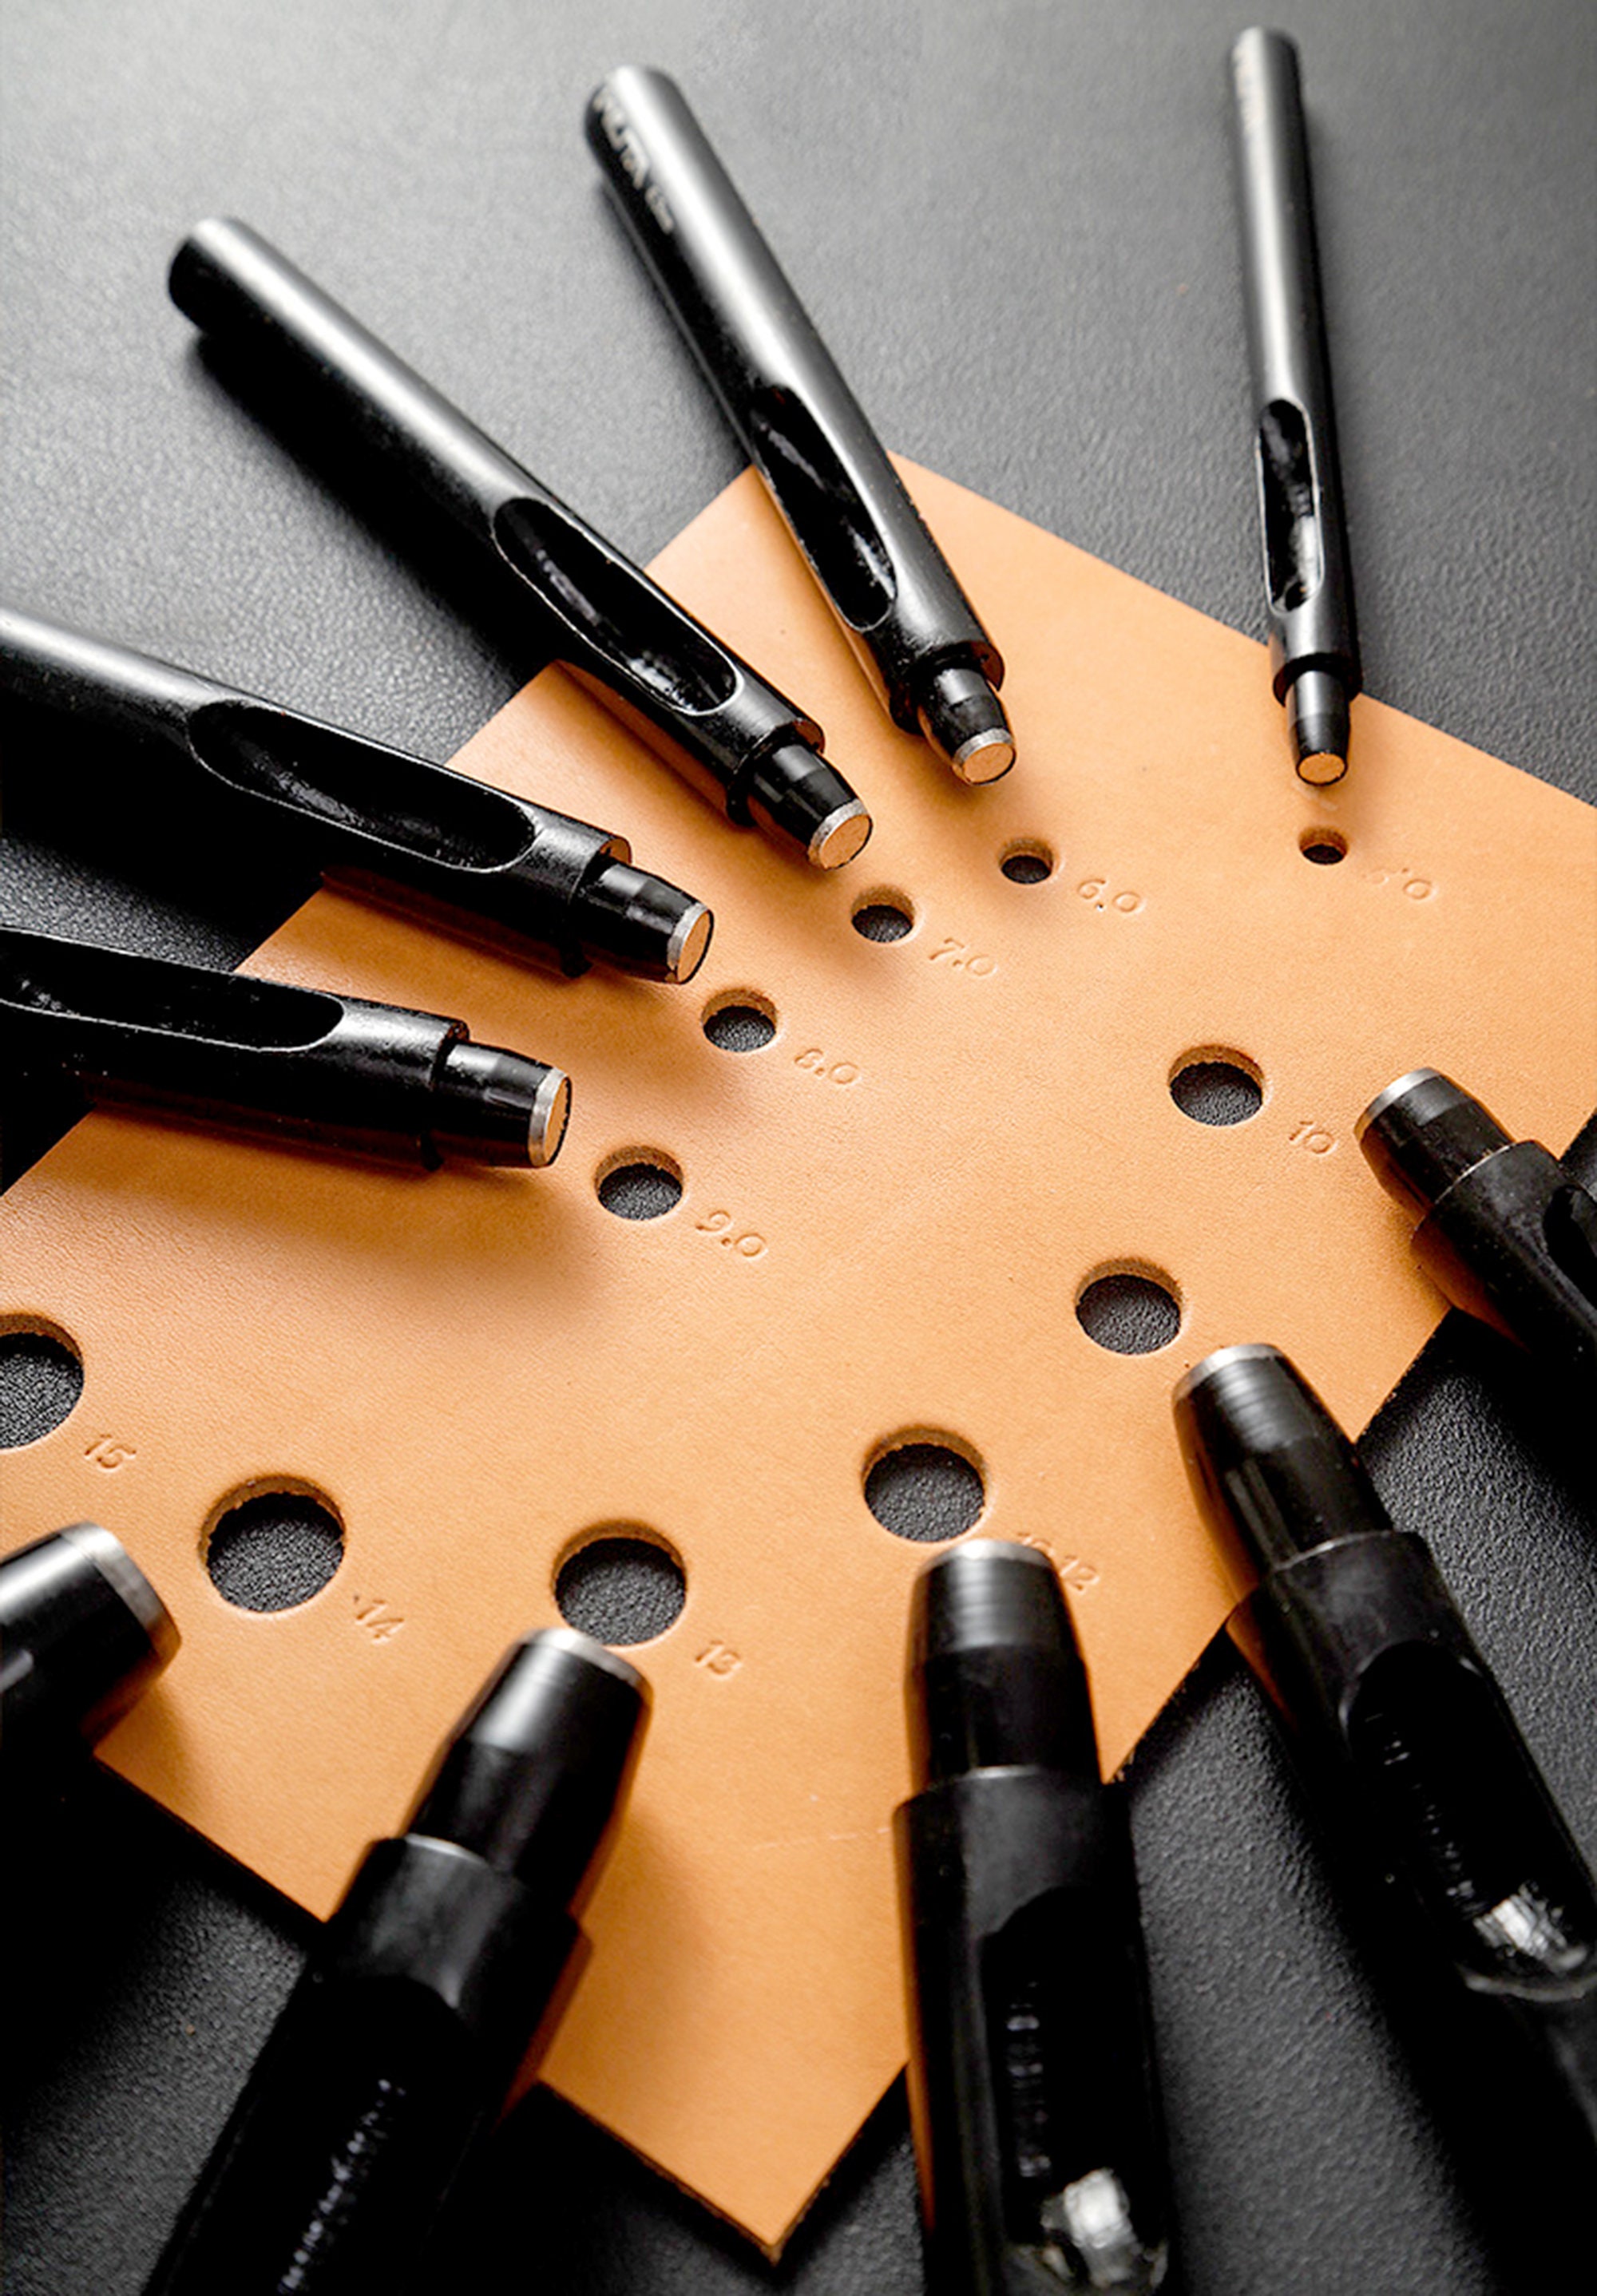 Leather Hole Punch with 6 Different Hole Sizes - Free Sample Pack